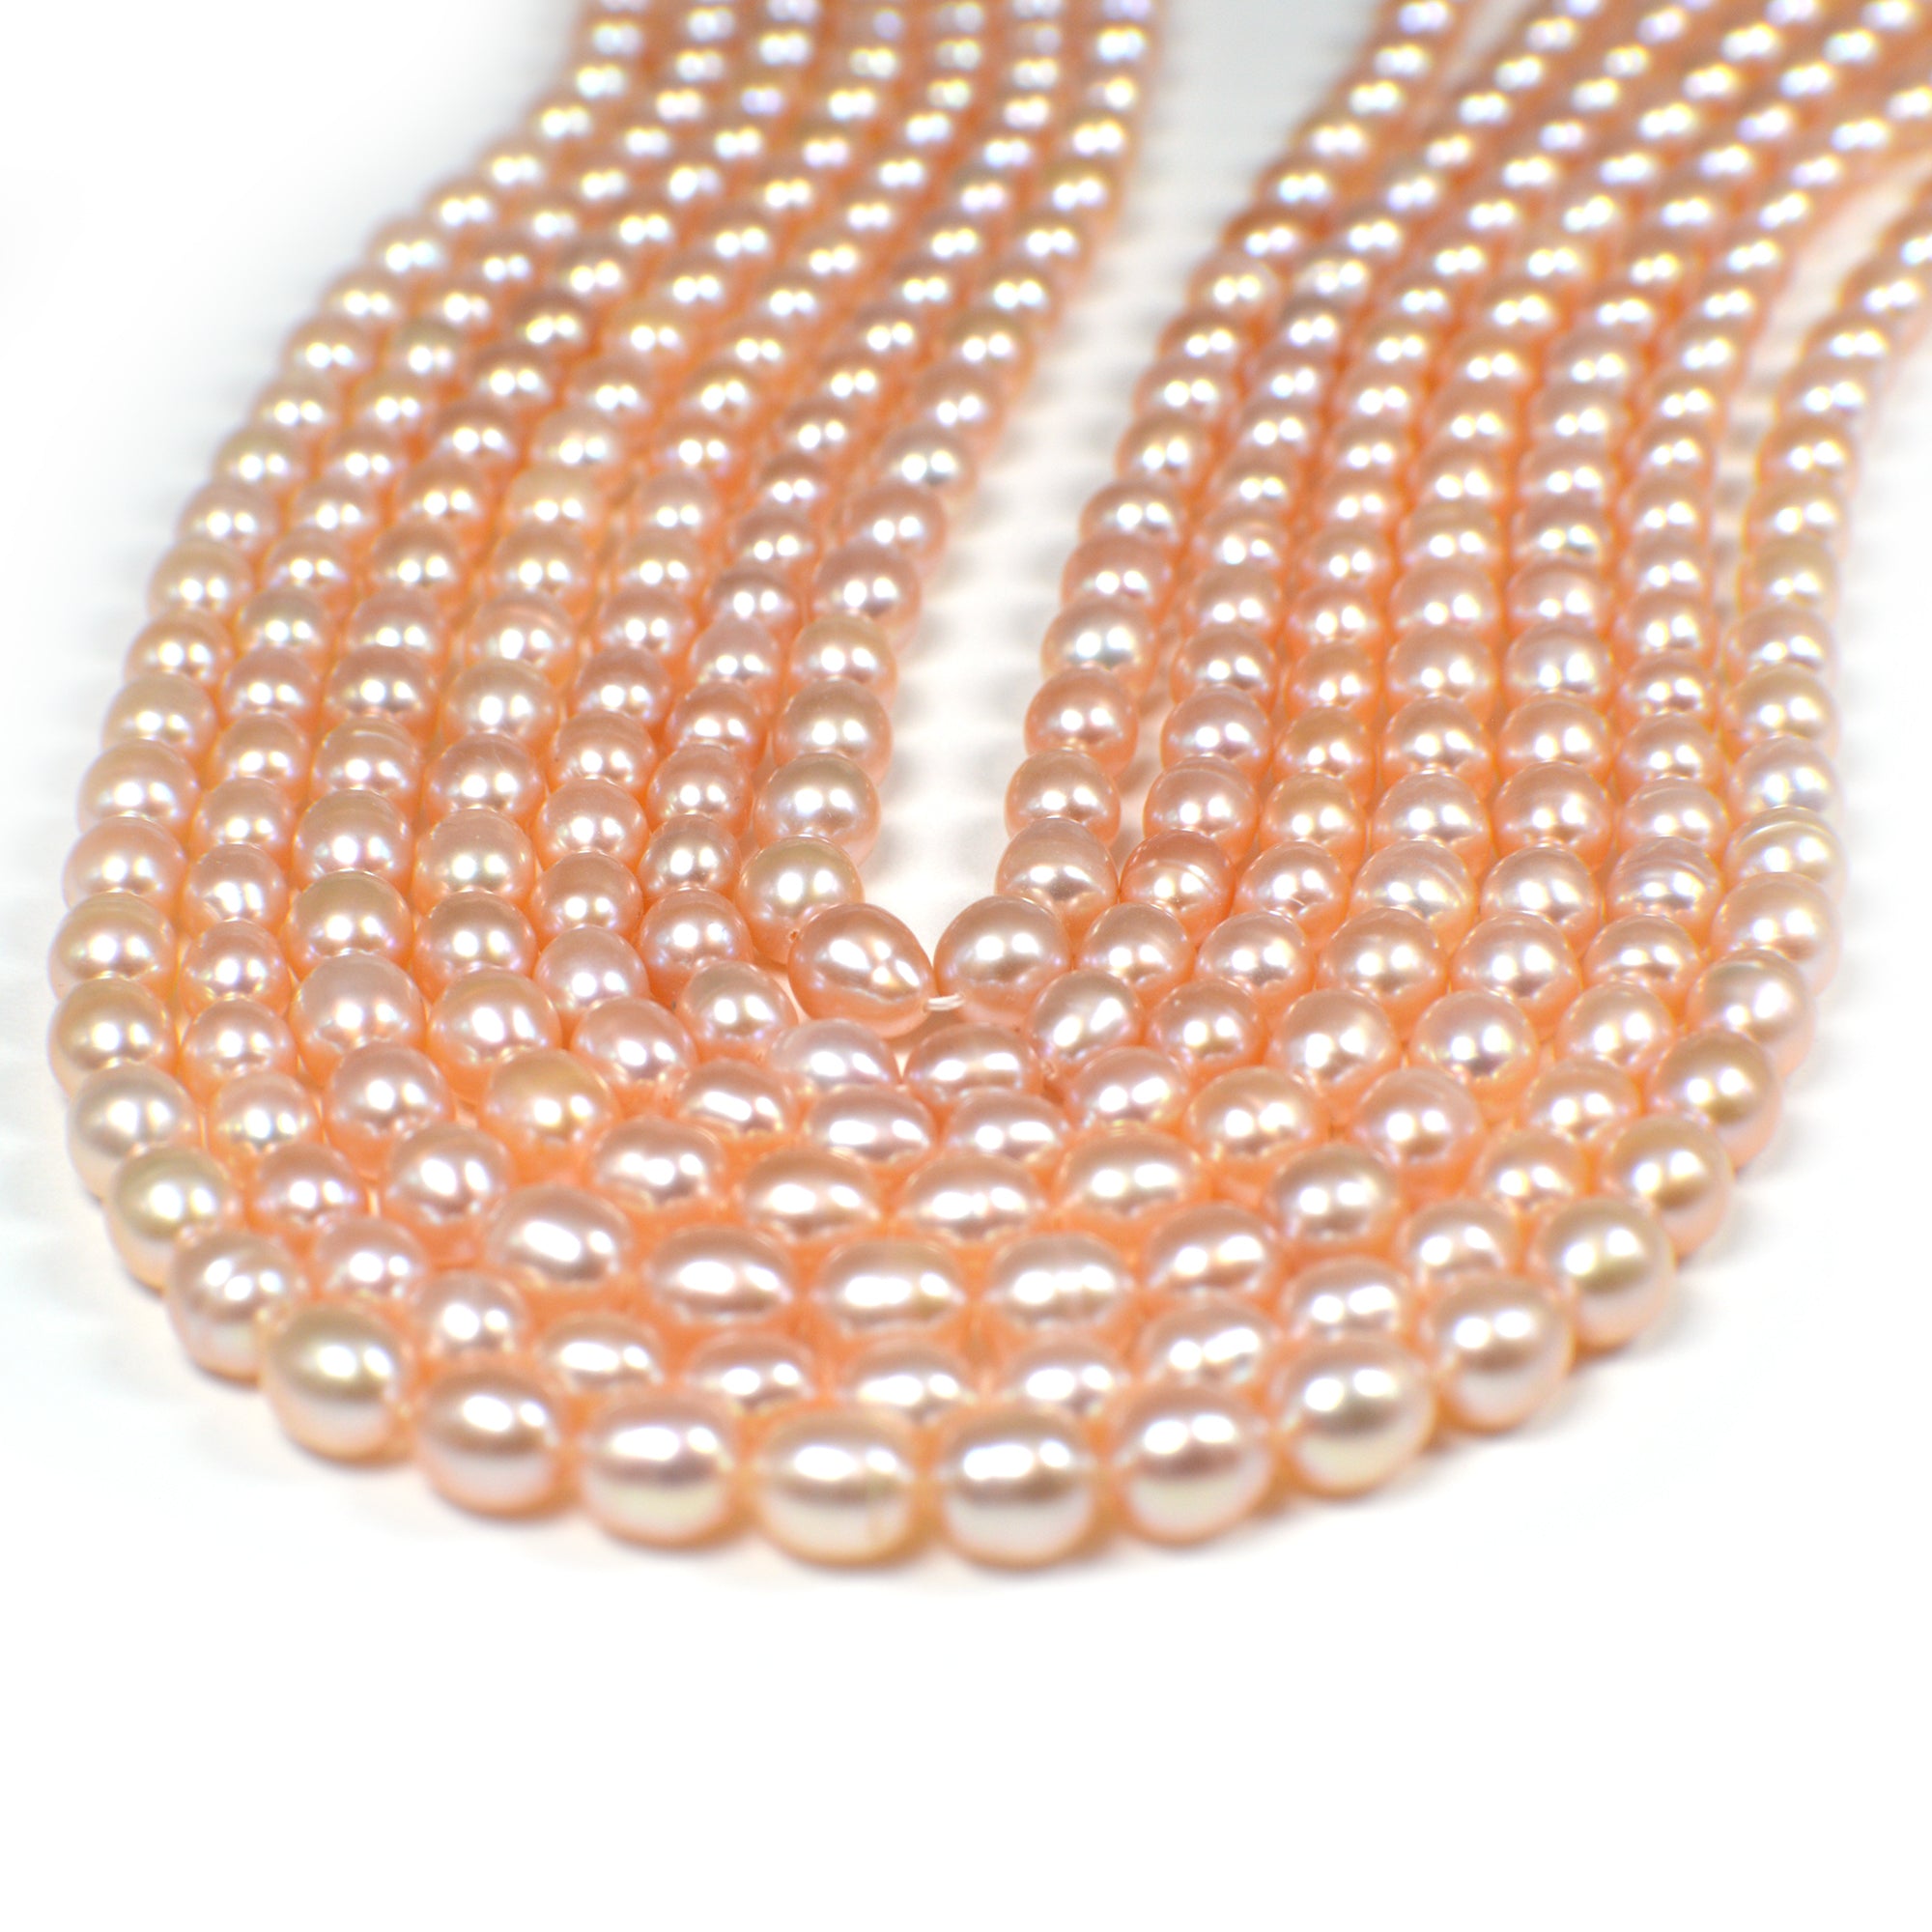 6x5 - 7x5 MM Pink Peach Rice Freshwater Pearls Beads